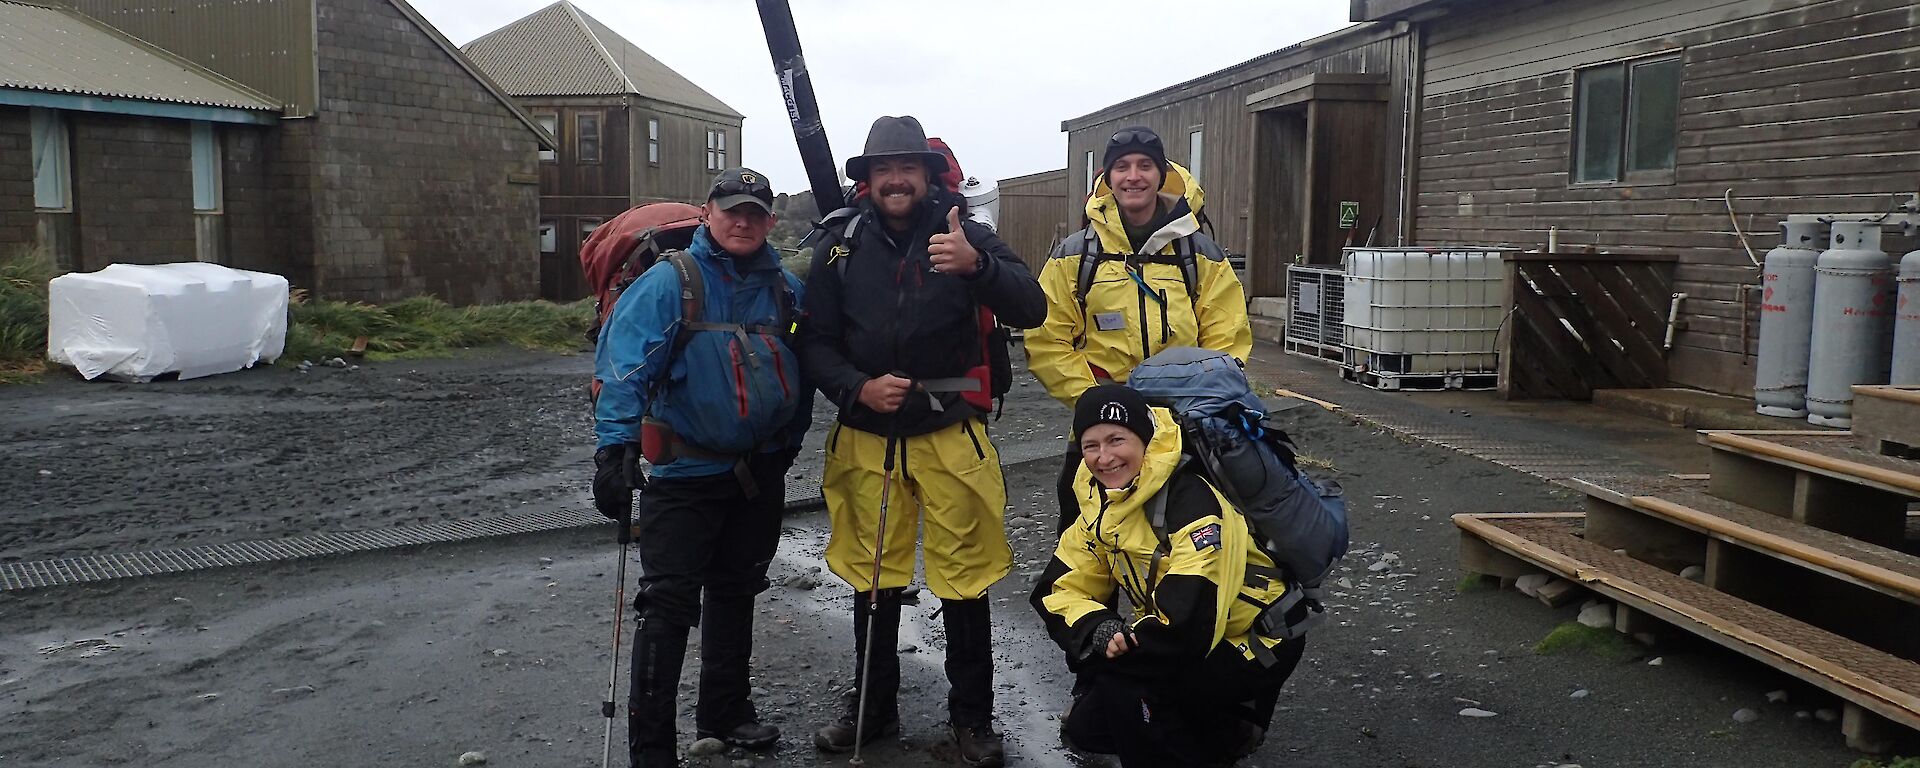 Four people stand in the main square of station kitted out in wet weather clothing and with field packs ready to leave on their familiarisation trip